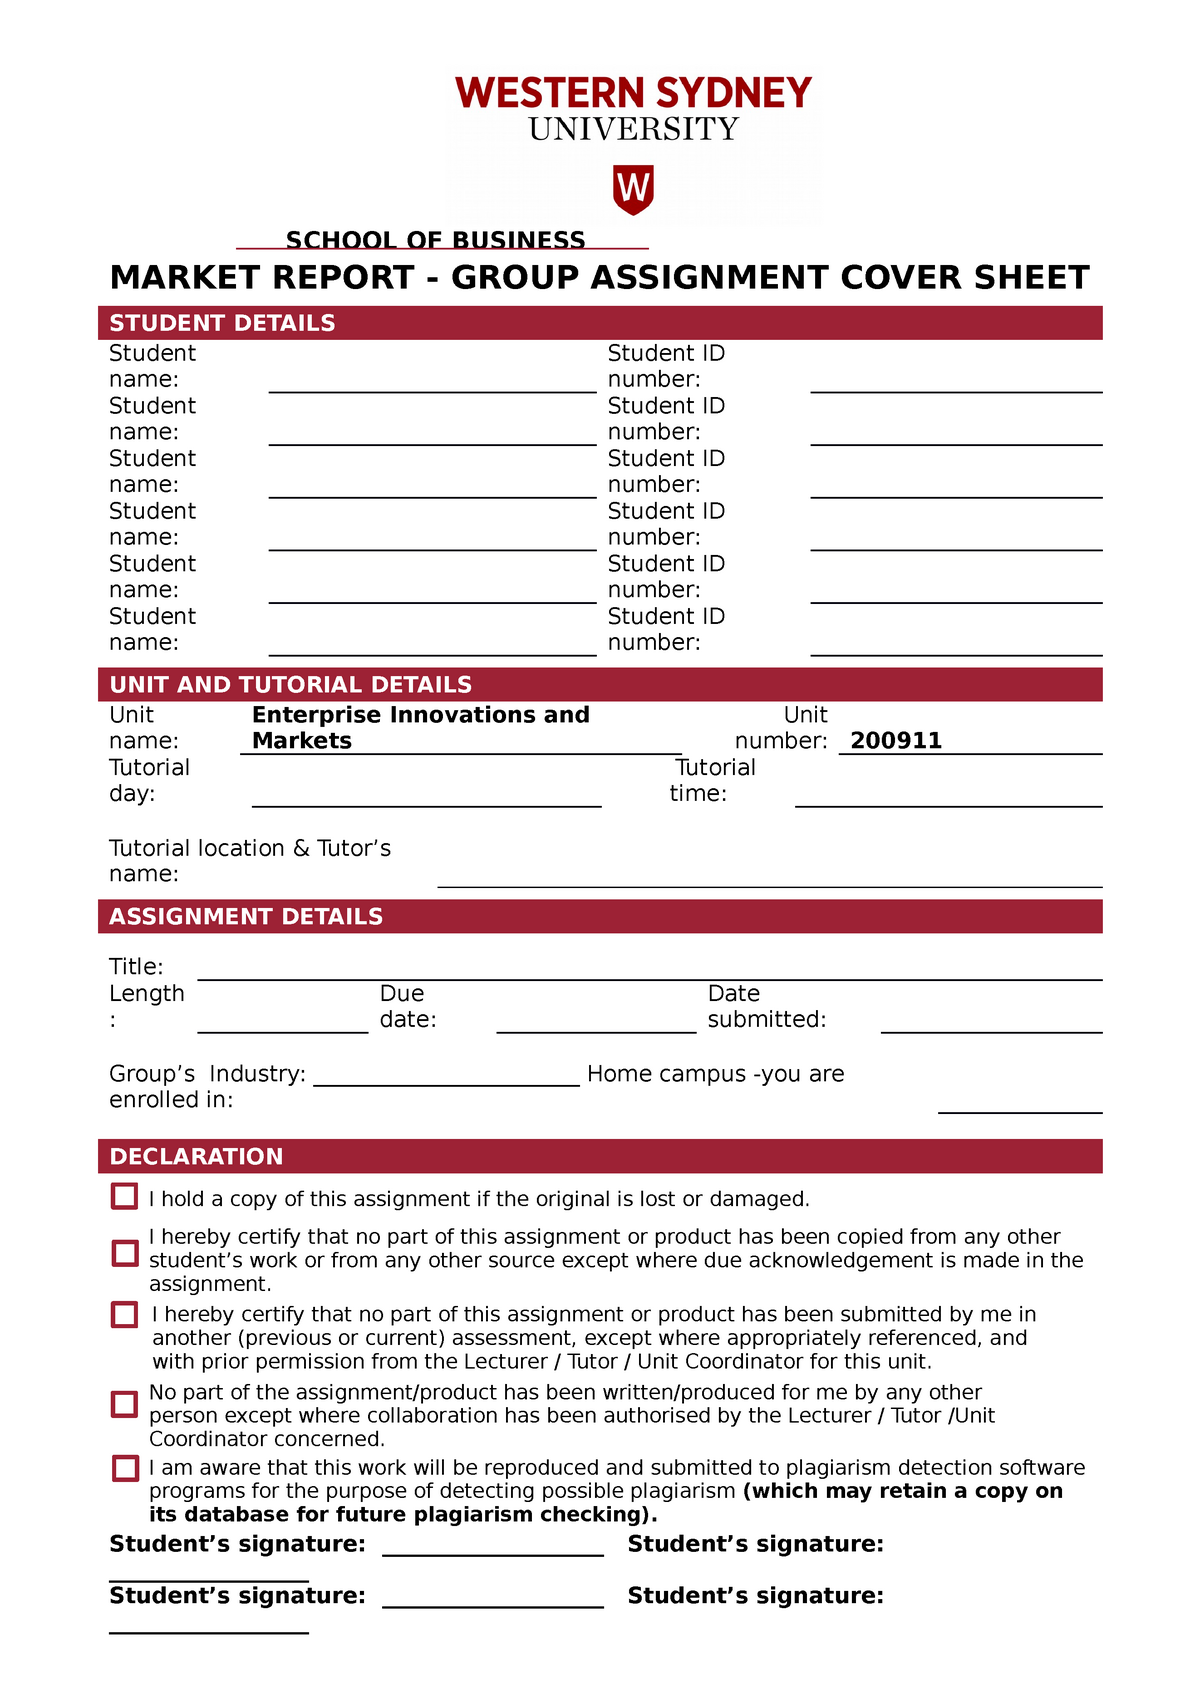 western sydney assignment cover sheet